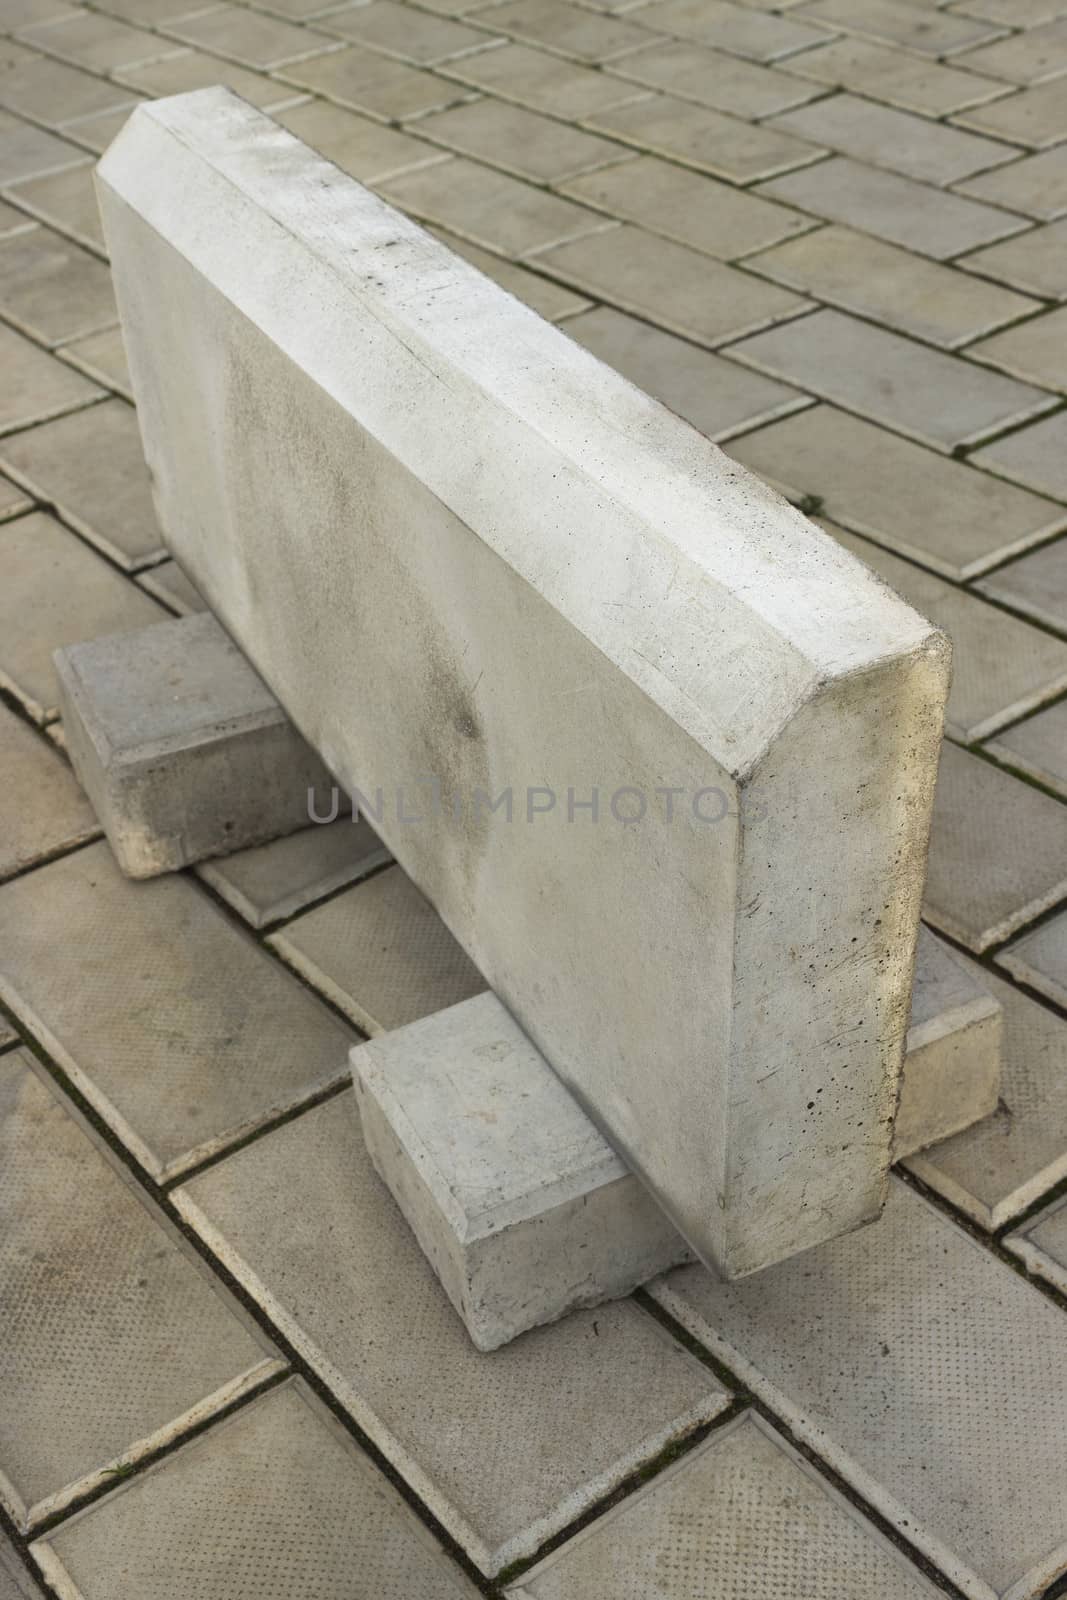 Large curb stone is made of concrete, on the stone floor